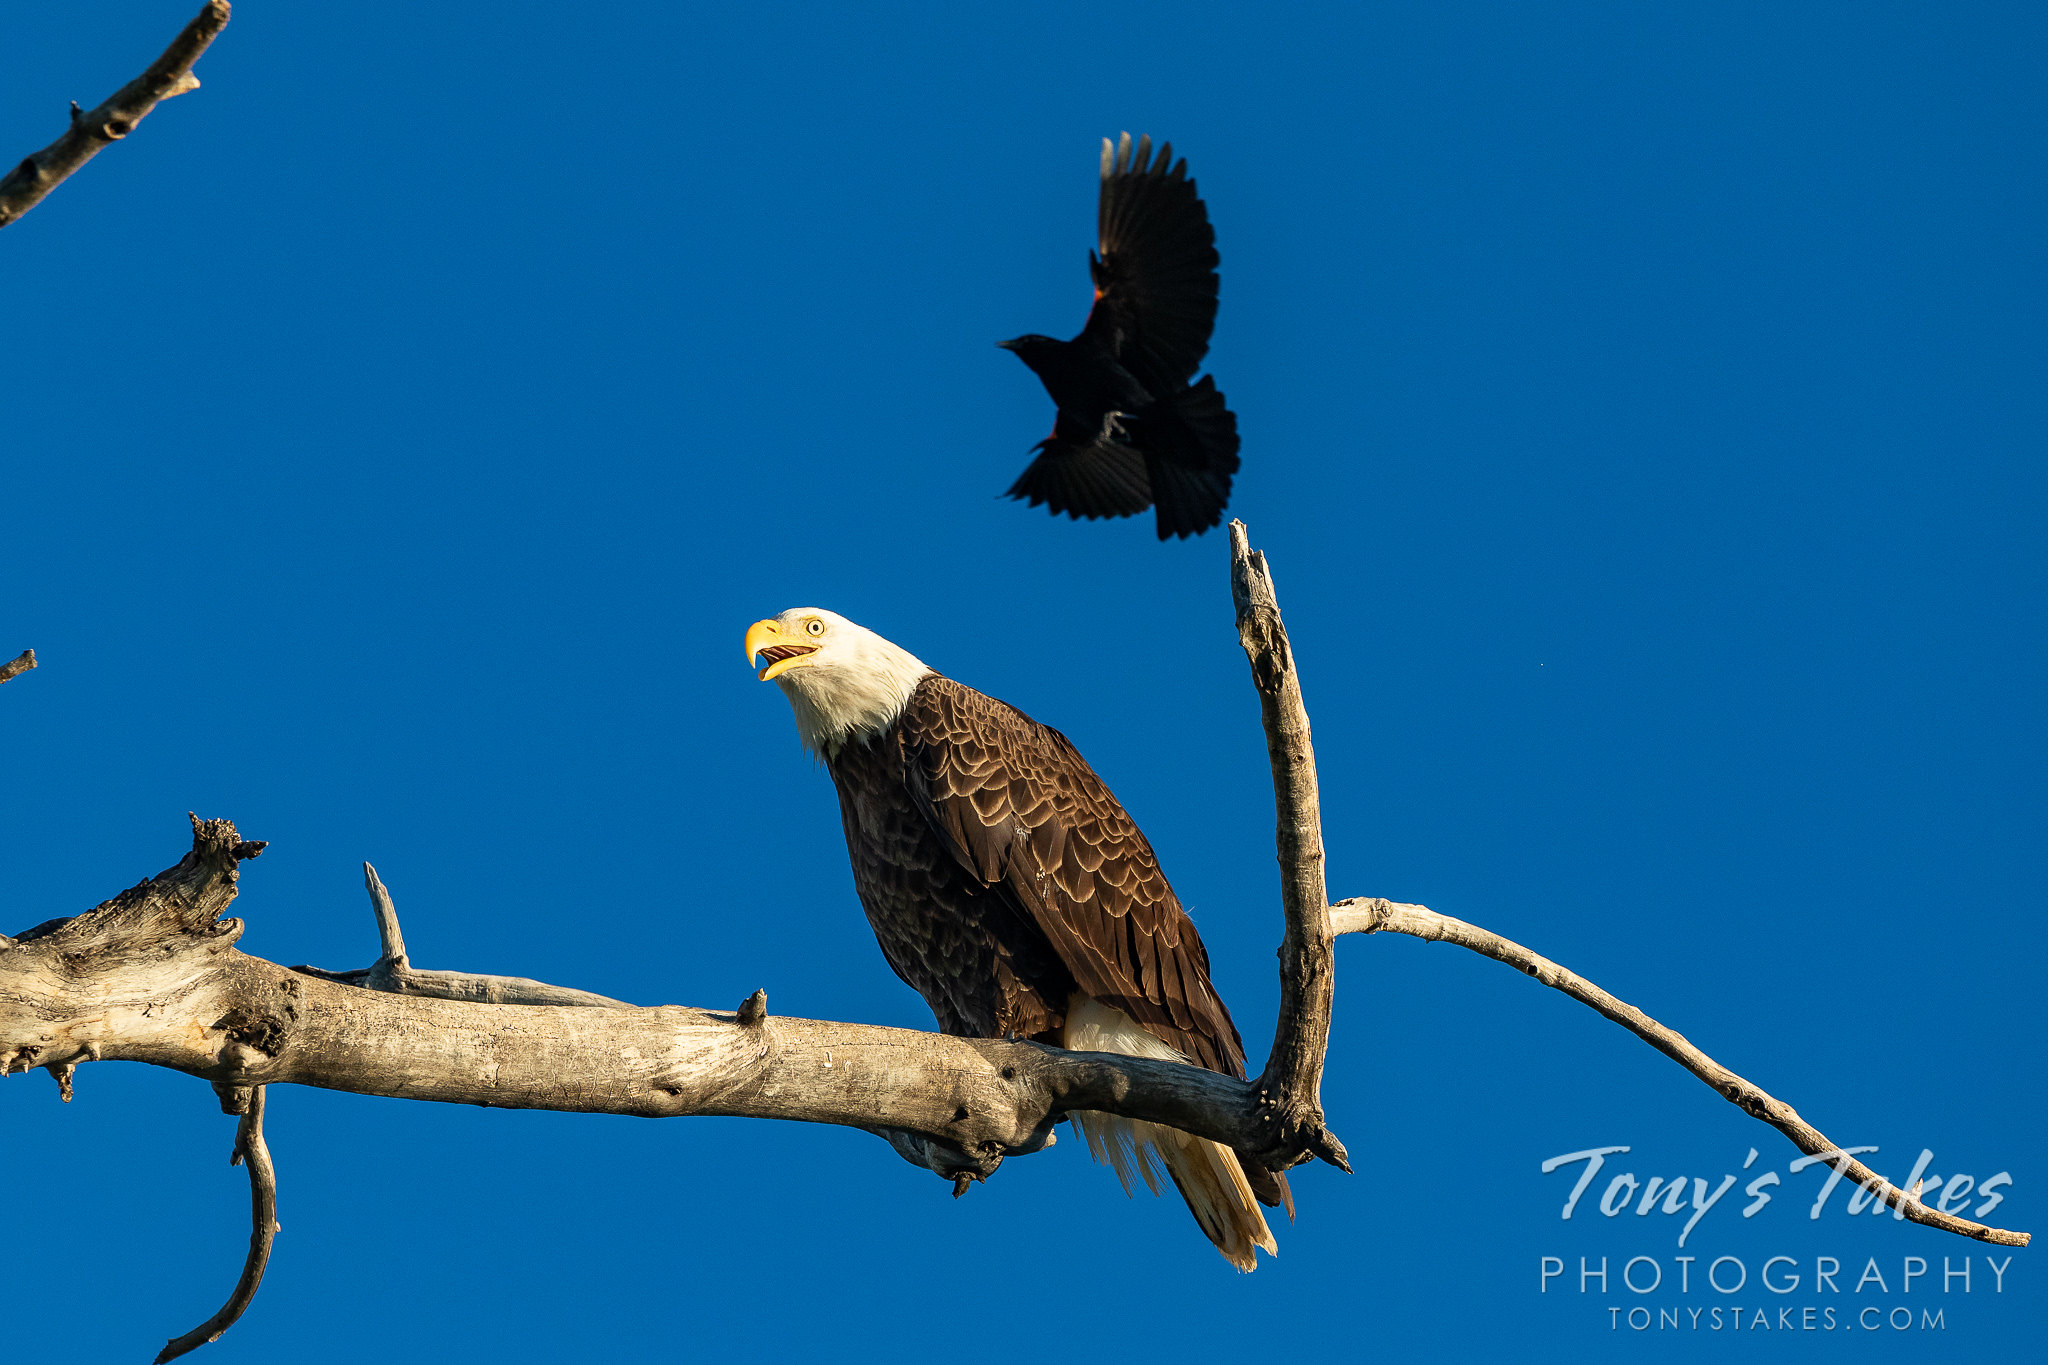 A bald eagle gets hassled by red-winged blackbirds. (© Tony's Takes)